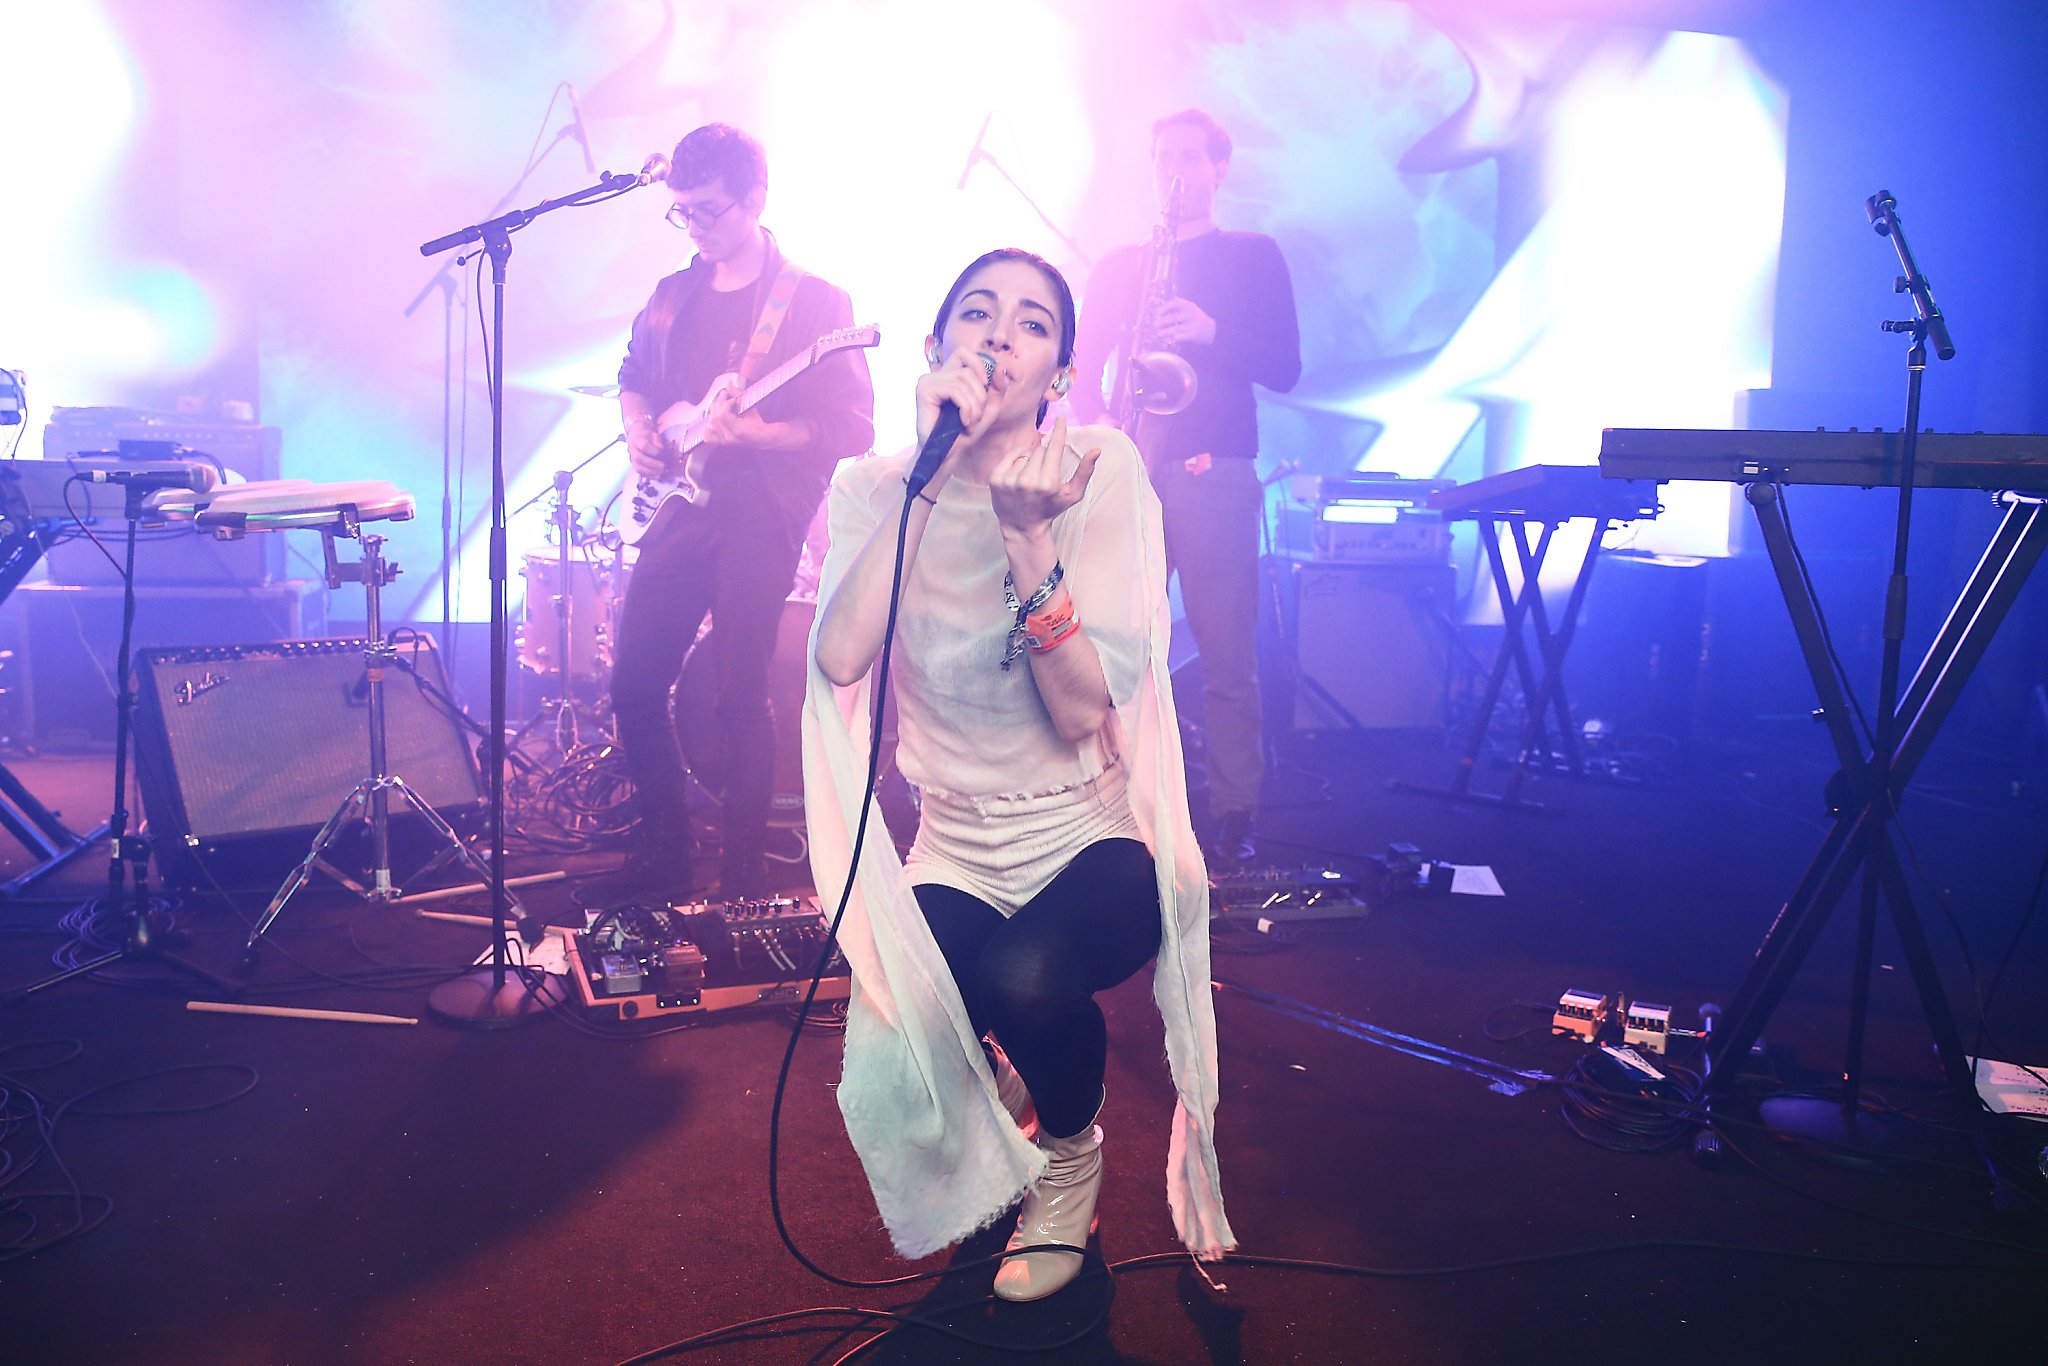 Chairlift hits its peak with one final tour